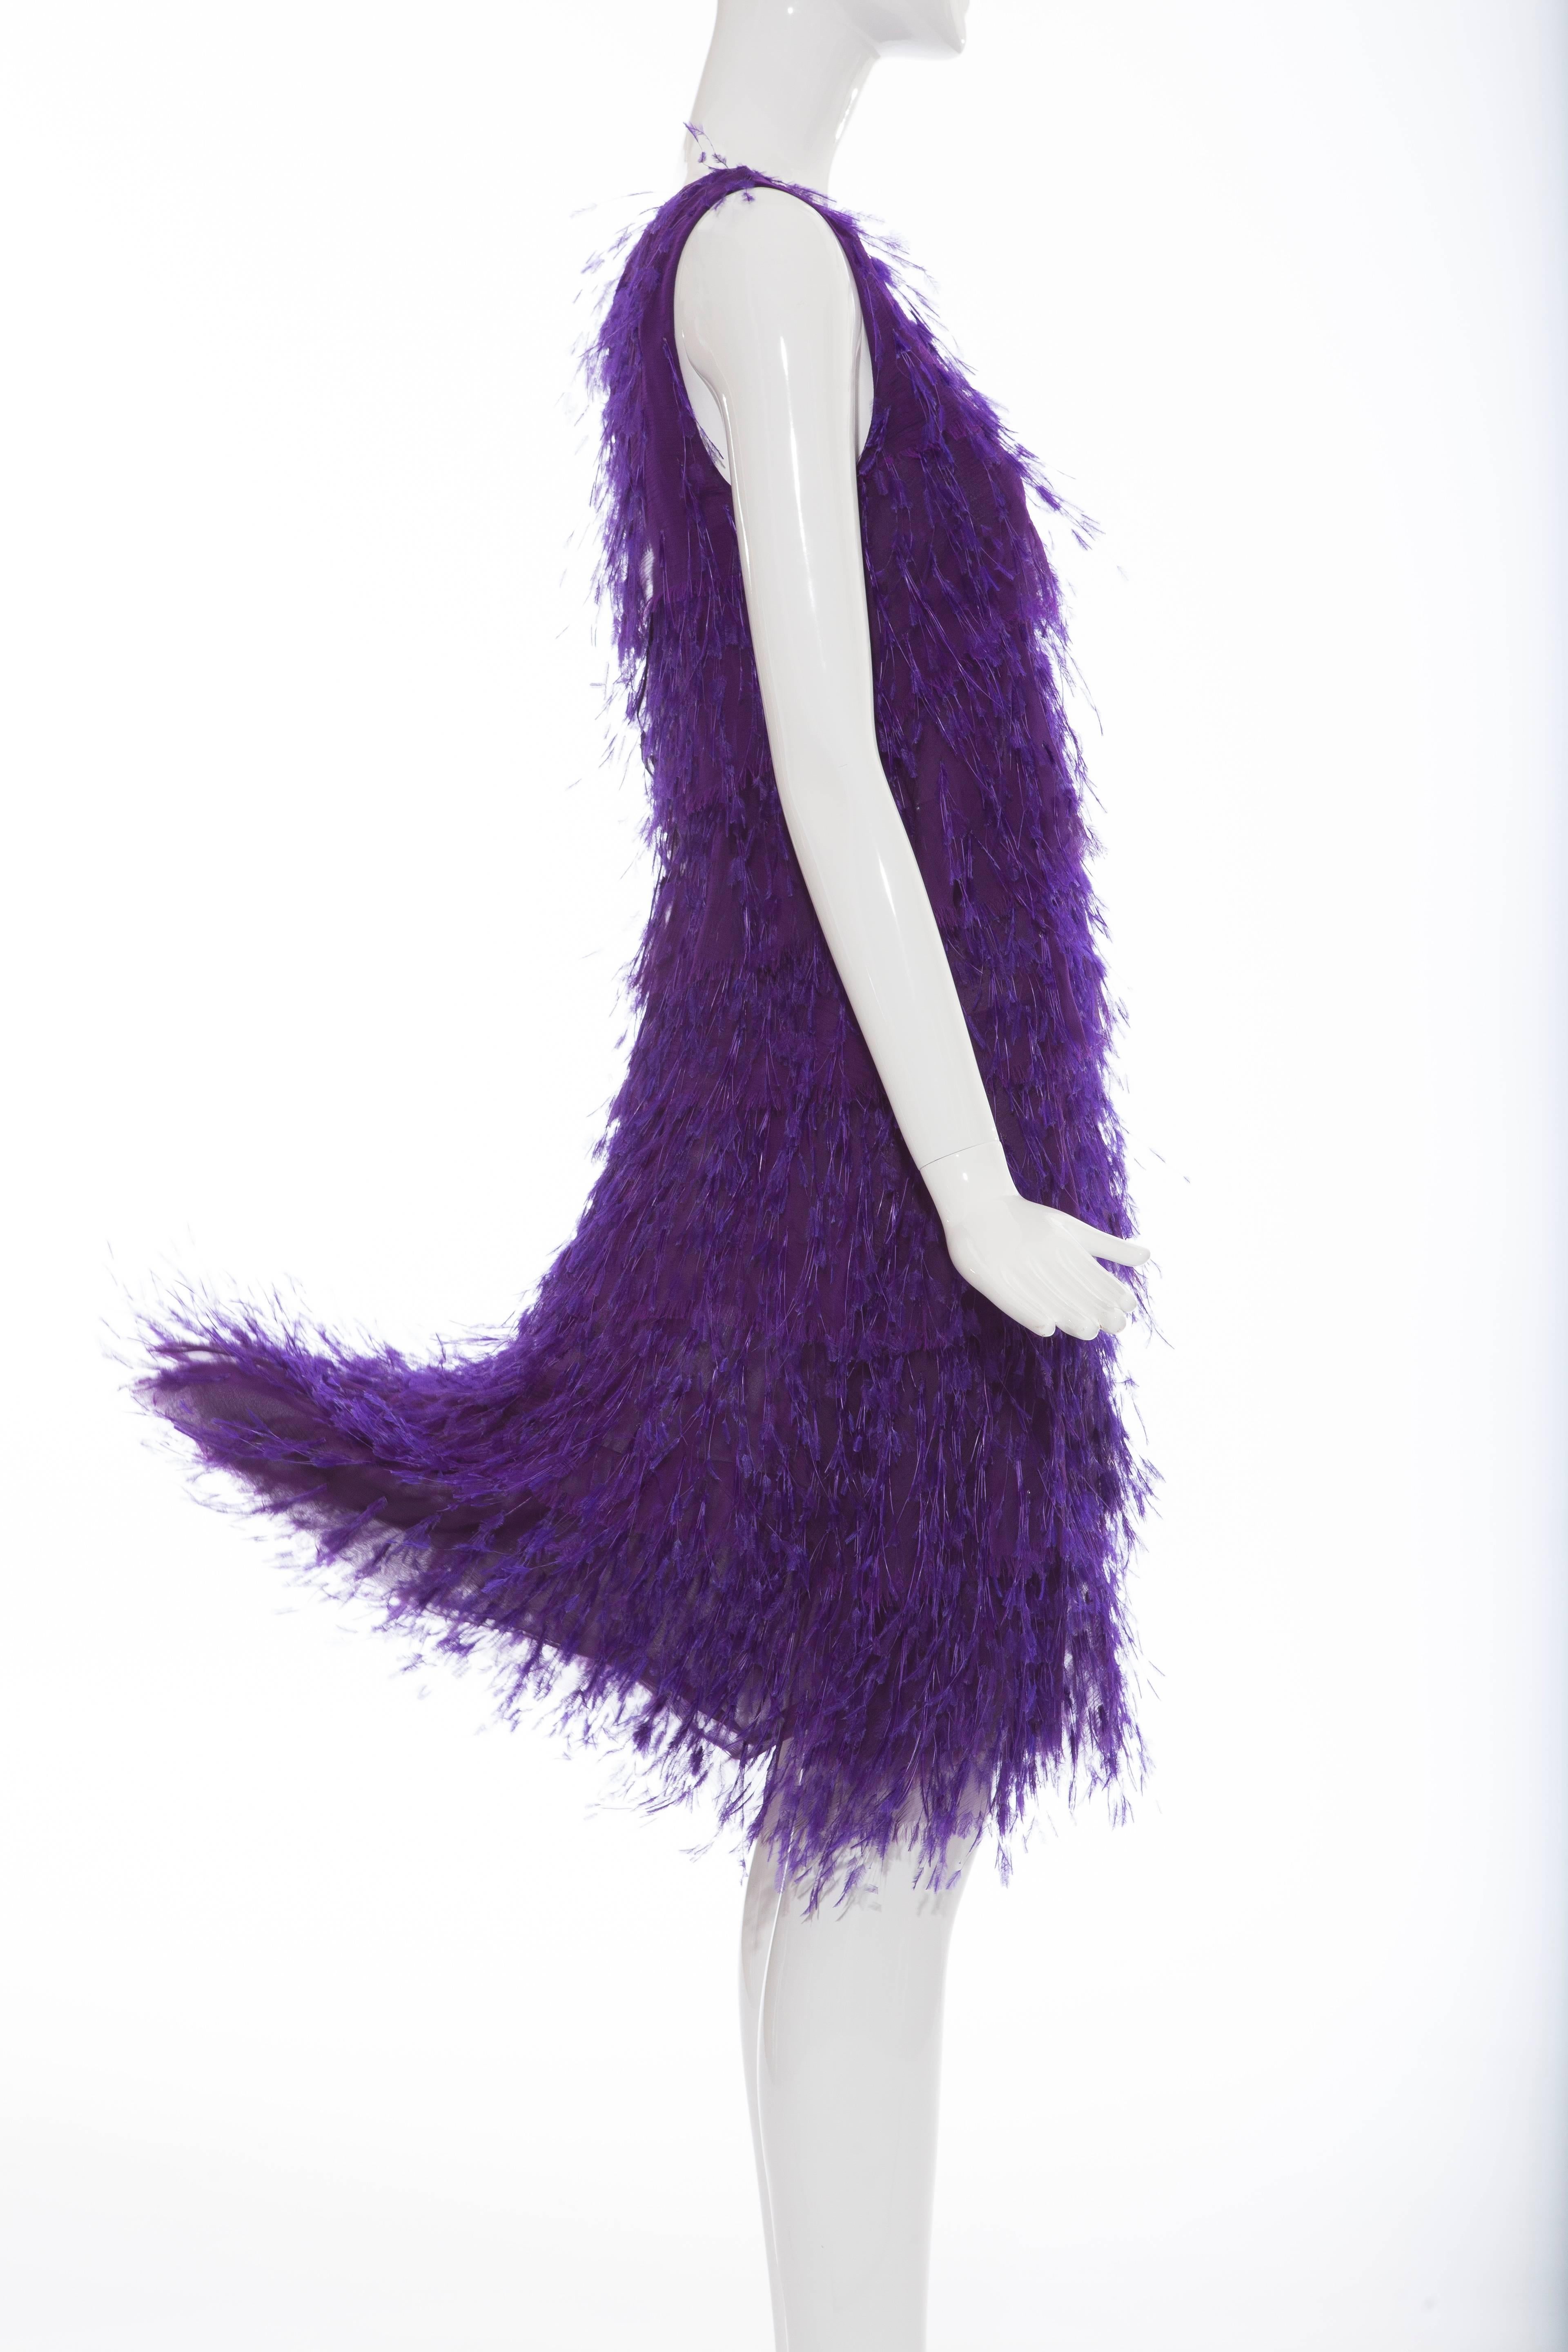 Chado Ralph Rucci Silk Dress With Feather Detail, Fall 2013 2